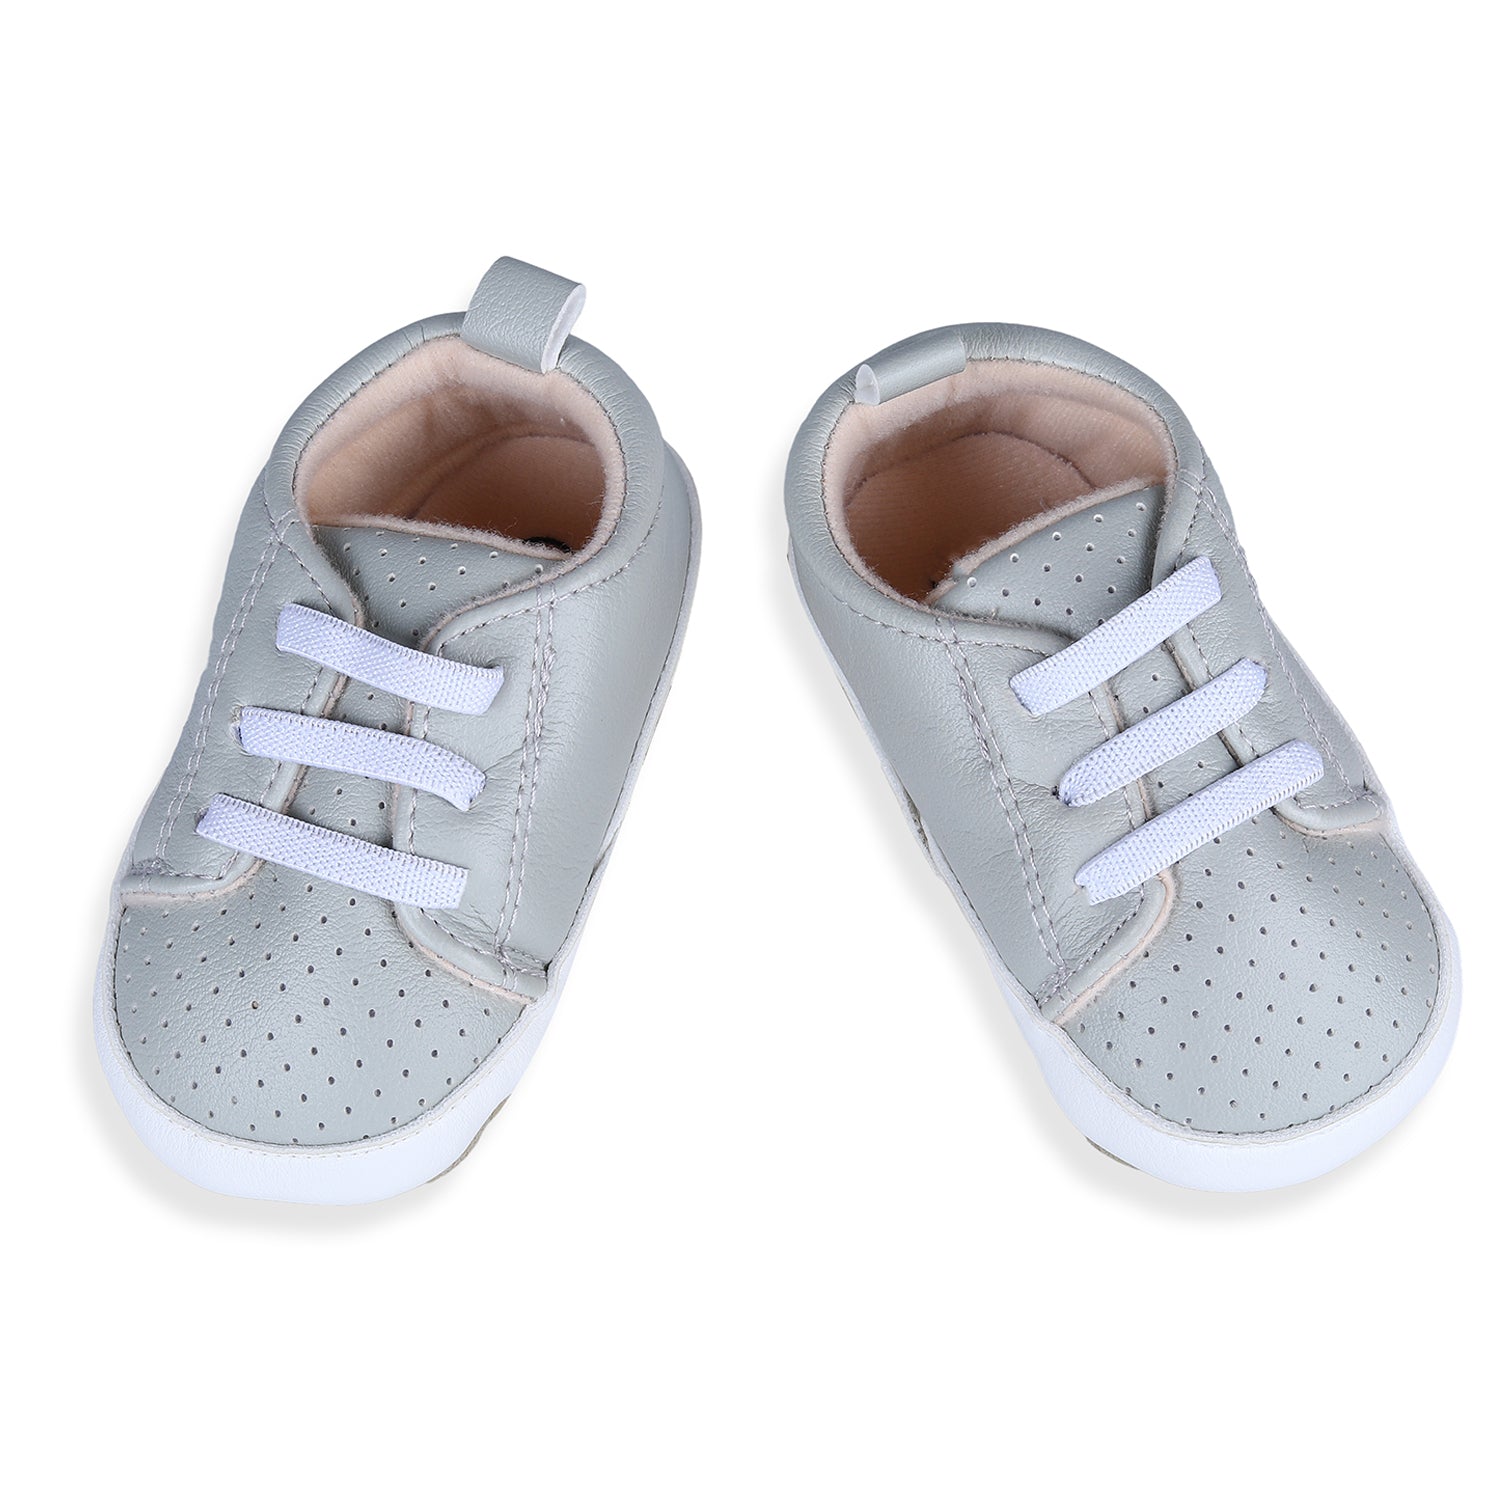 Lace-Up Comfortable And Breathable Anti-Slip Sneaker Shoes - Grey - Baby Moo